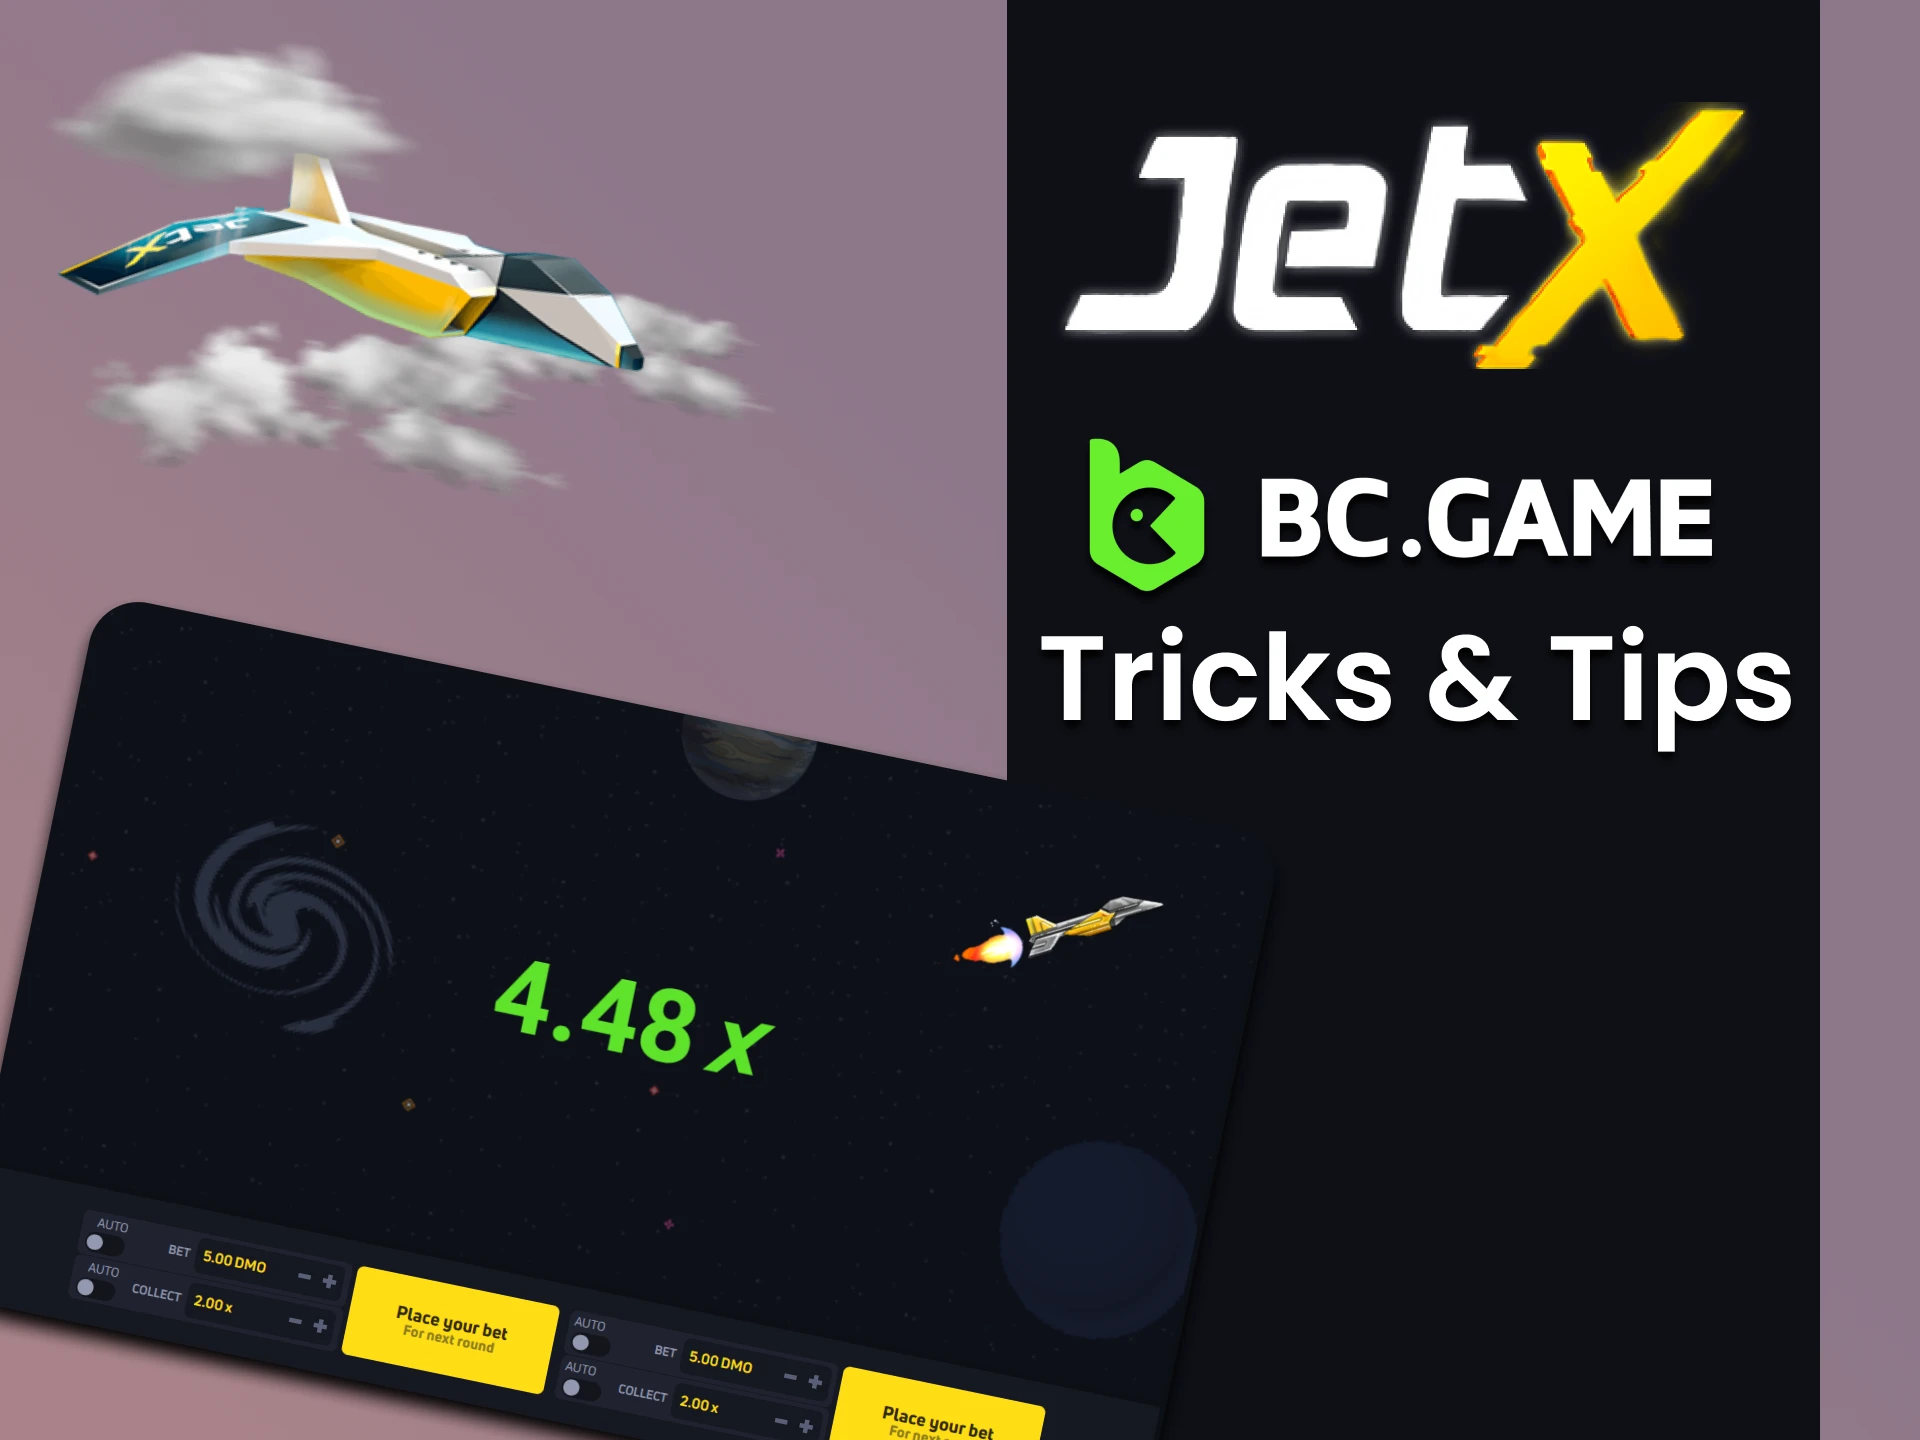 Learn tips for winning JetX on BC Game.